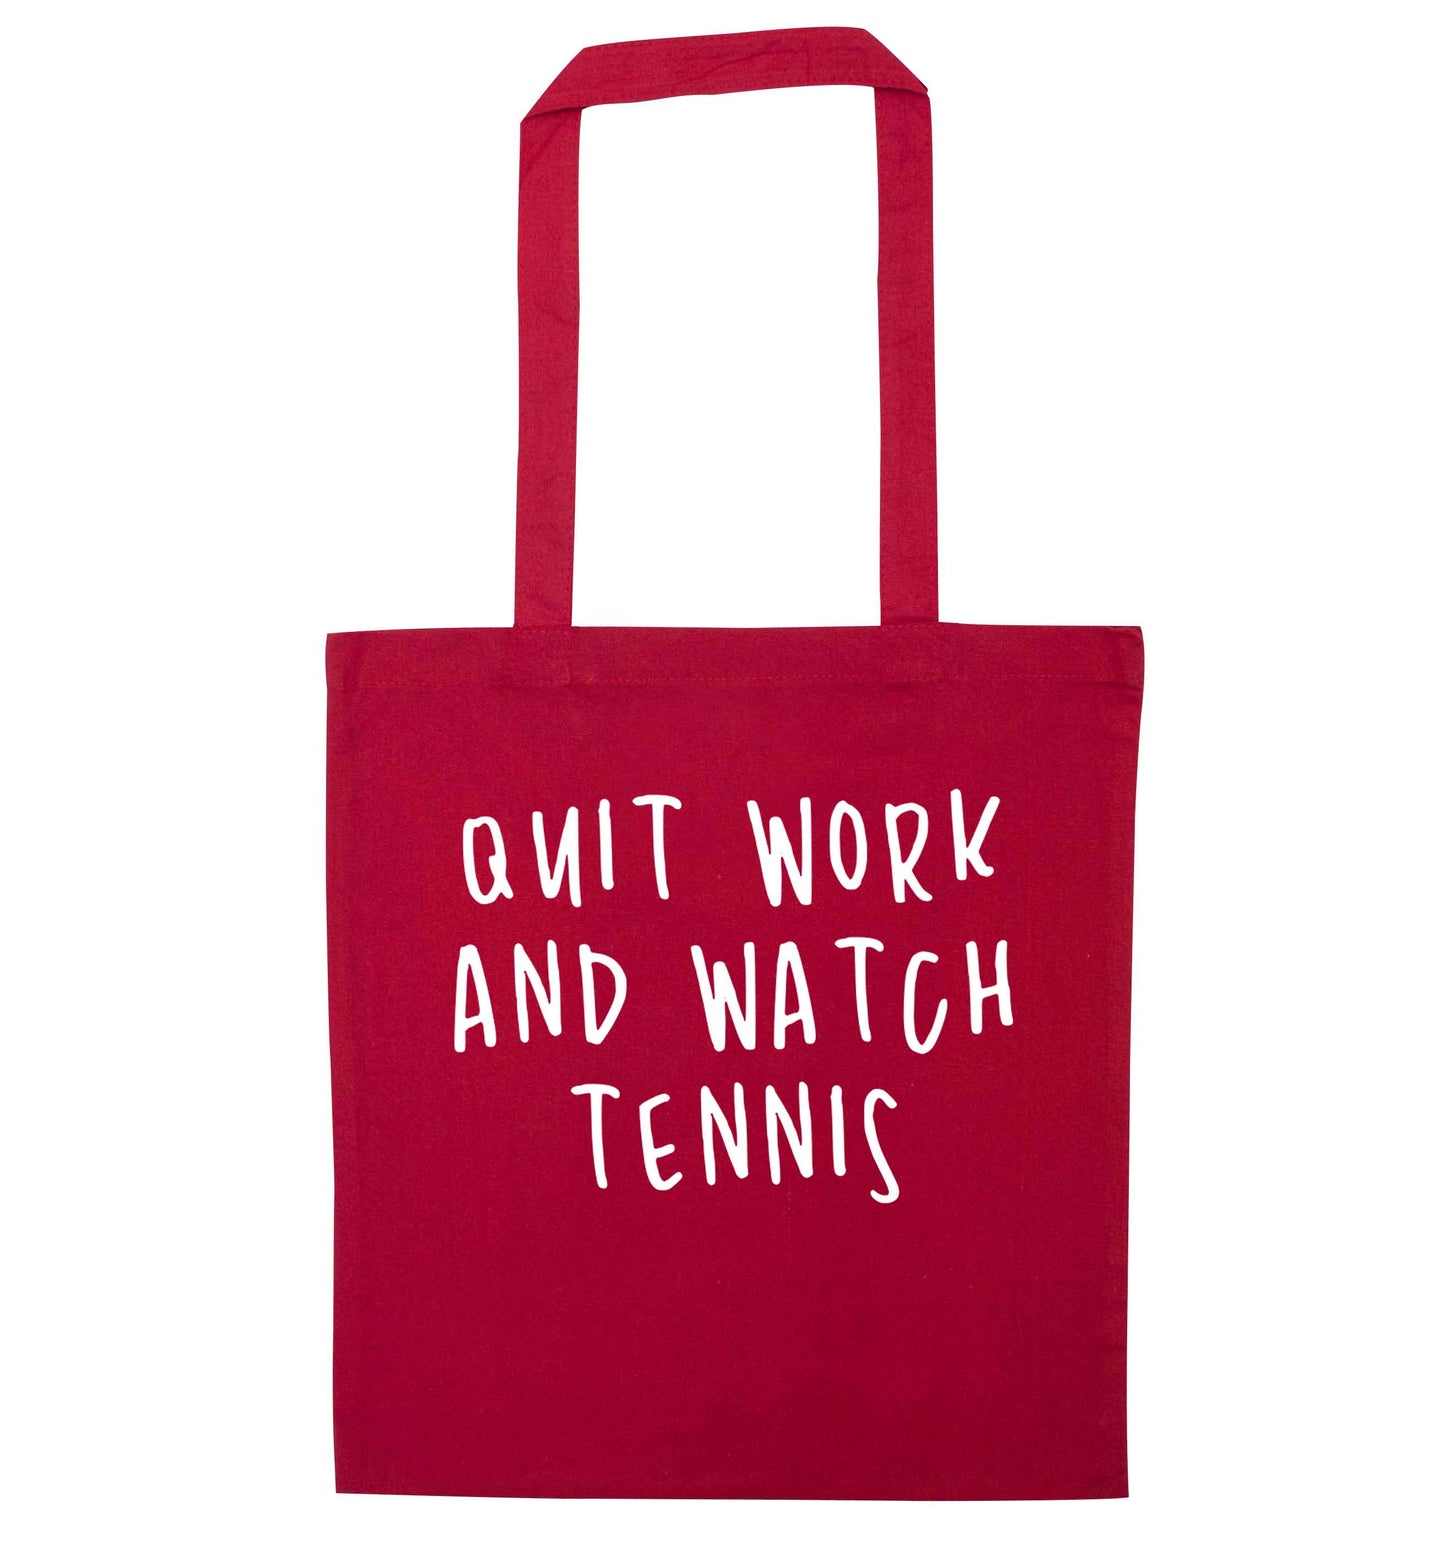 Quit work and watch tennis red tote bag